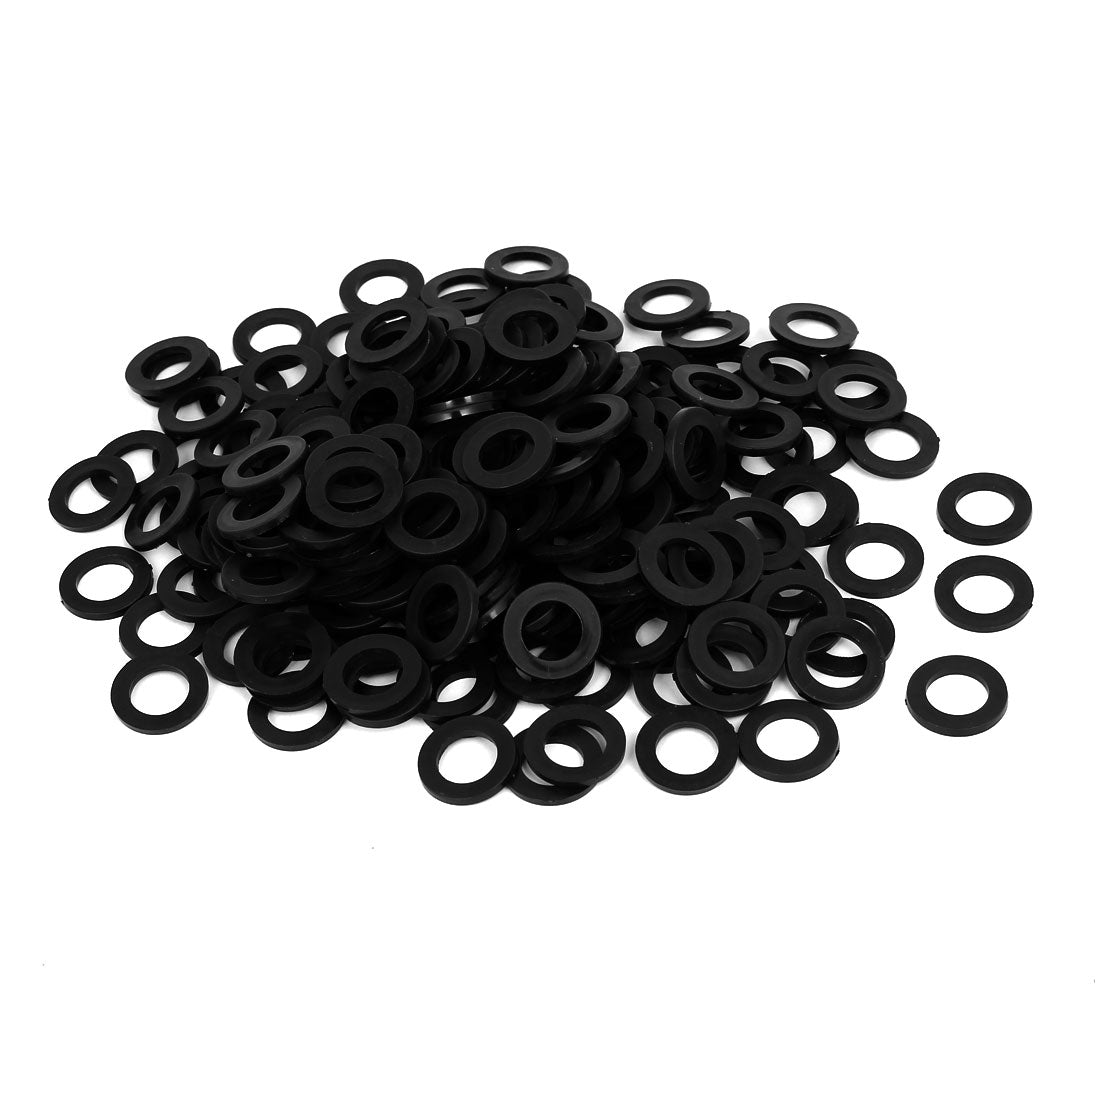 Uxcell Uxcell 4mm x 10mm x 1mm Nylon Flat Insulating Washers Gaskets Spacers Black 300PCS